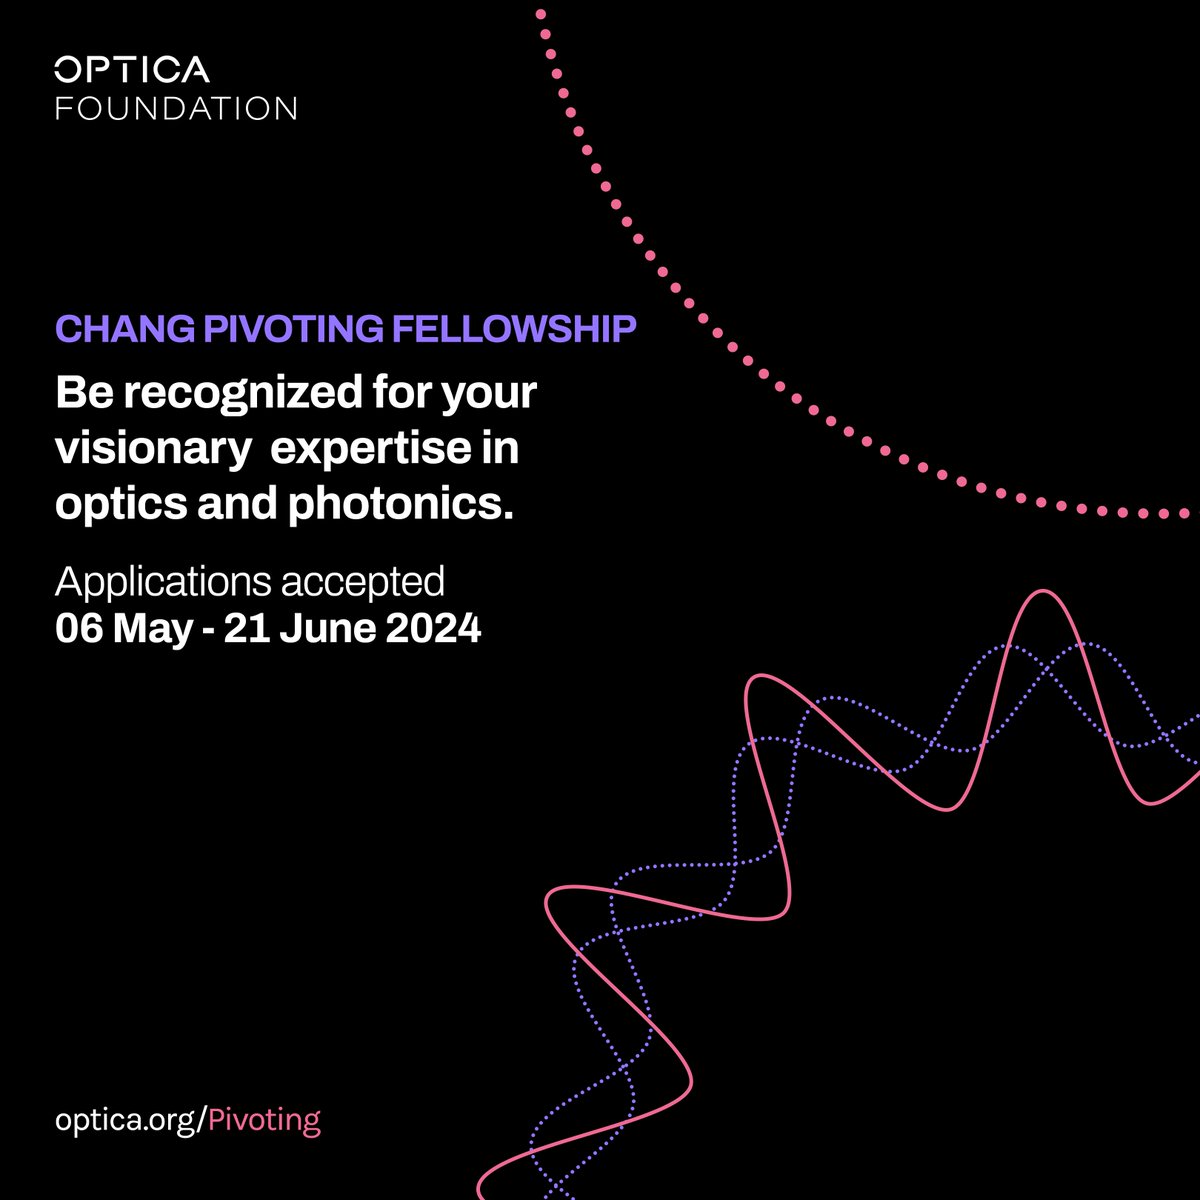 The world needs optics visionaries. Apply for the Chang Pivoting Fellowship to take your expertise outside of the lab through public policy, government, journalism and other #career paths to advance science and improve society! Apply by 21 June: ow.ly/uHJ850RzBaS